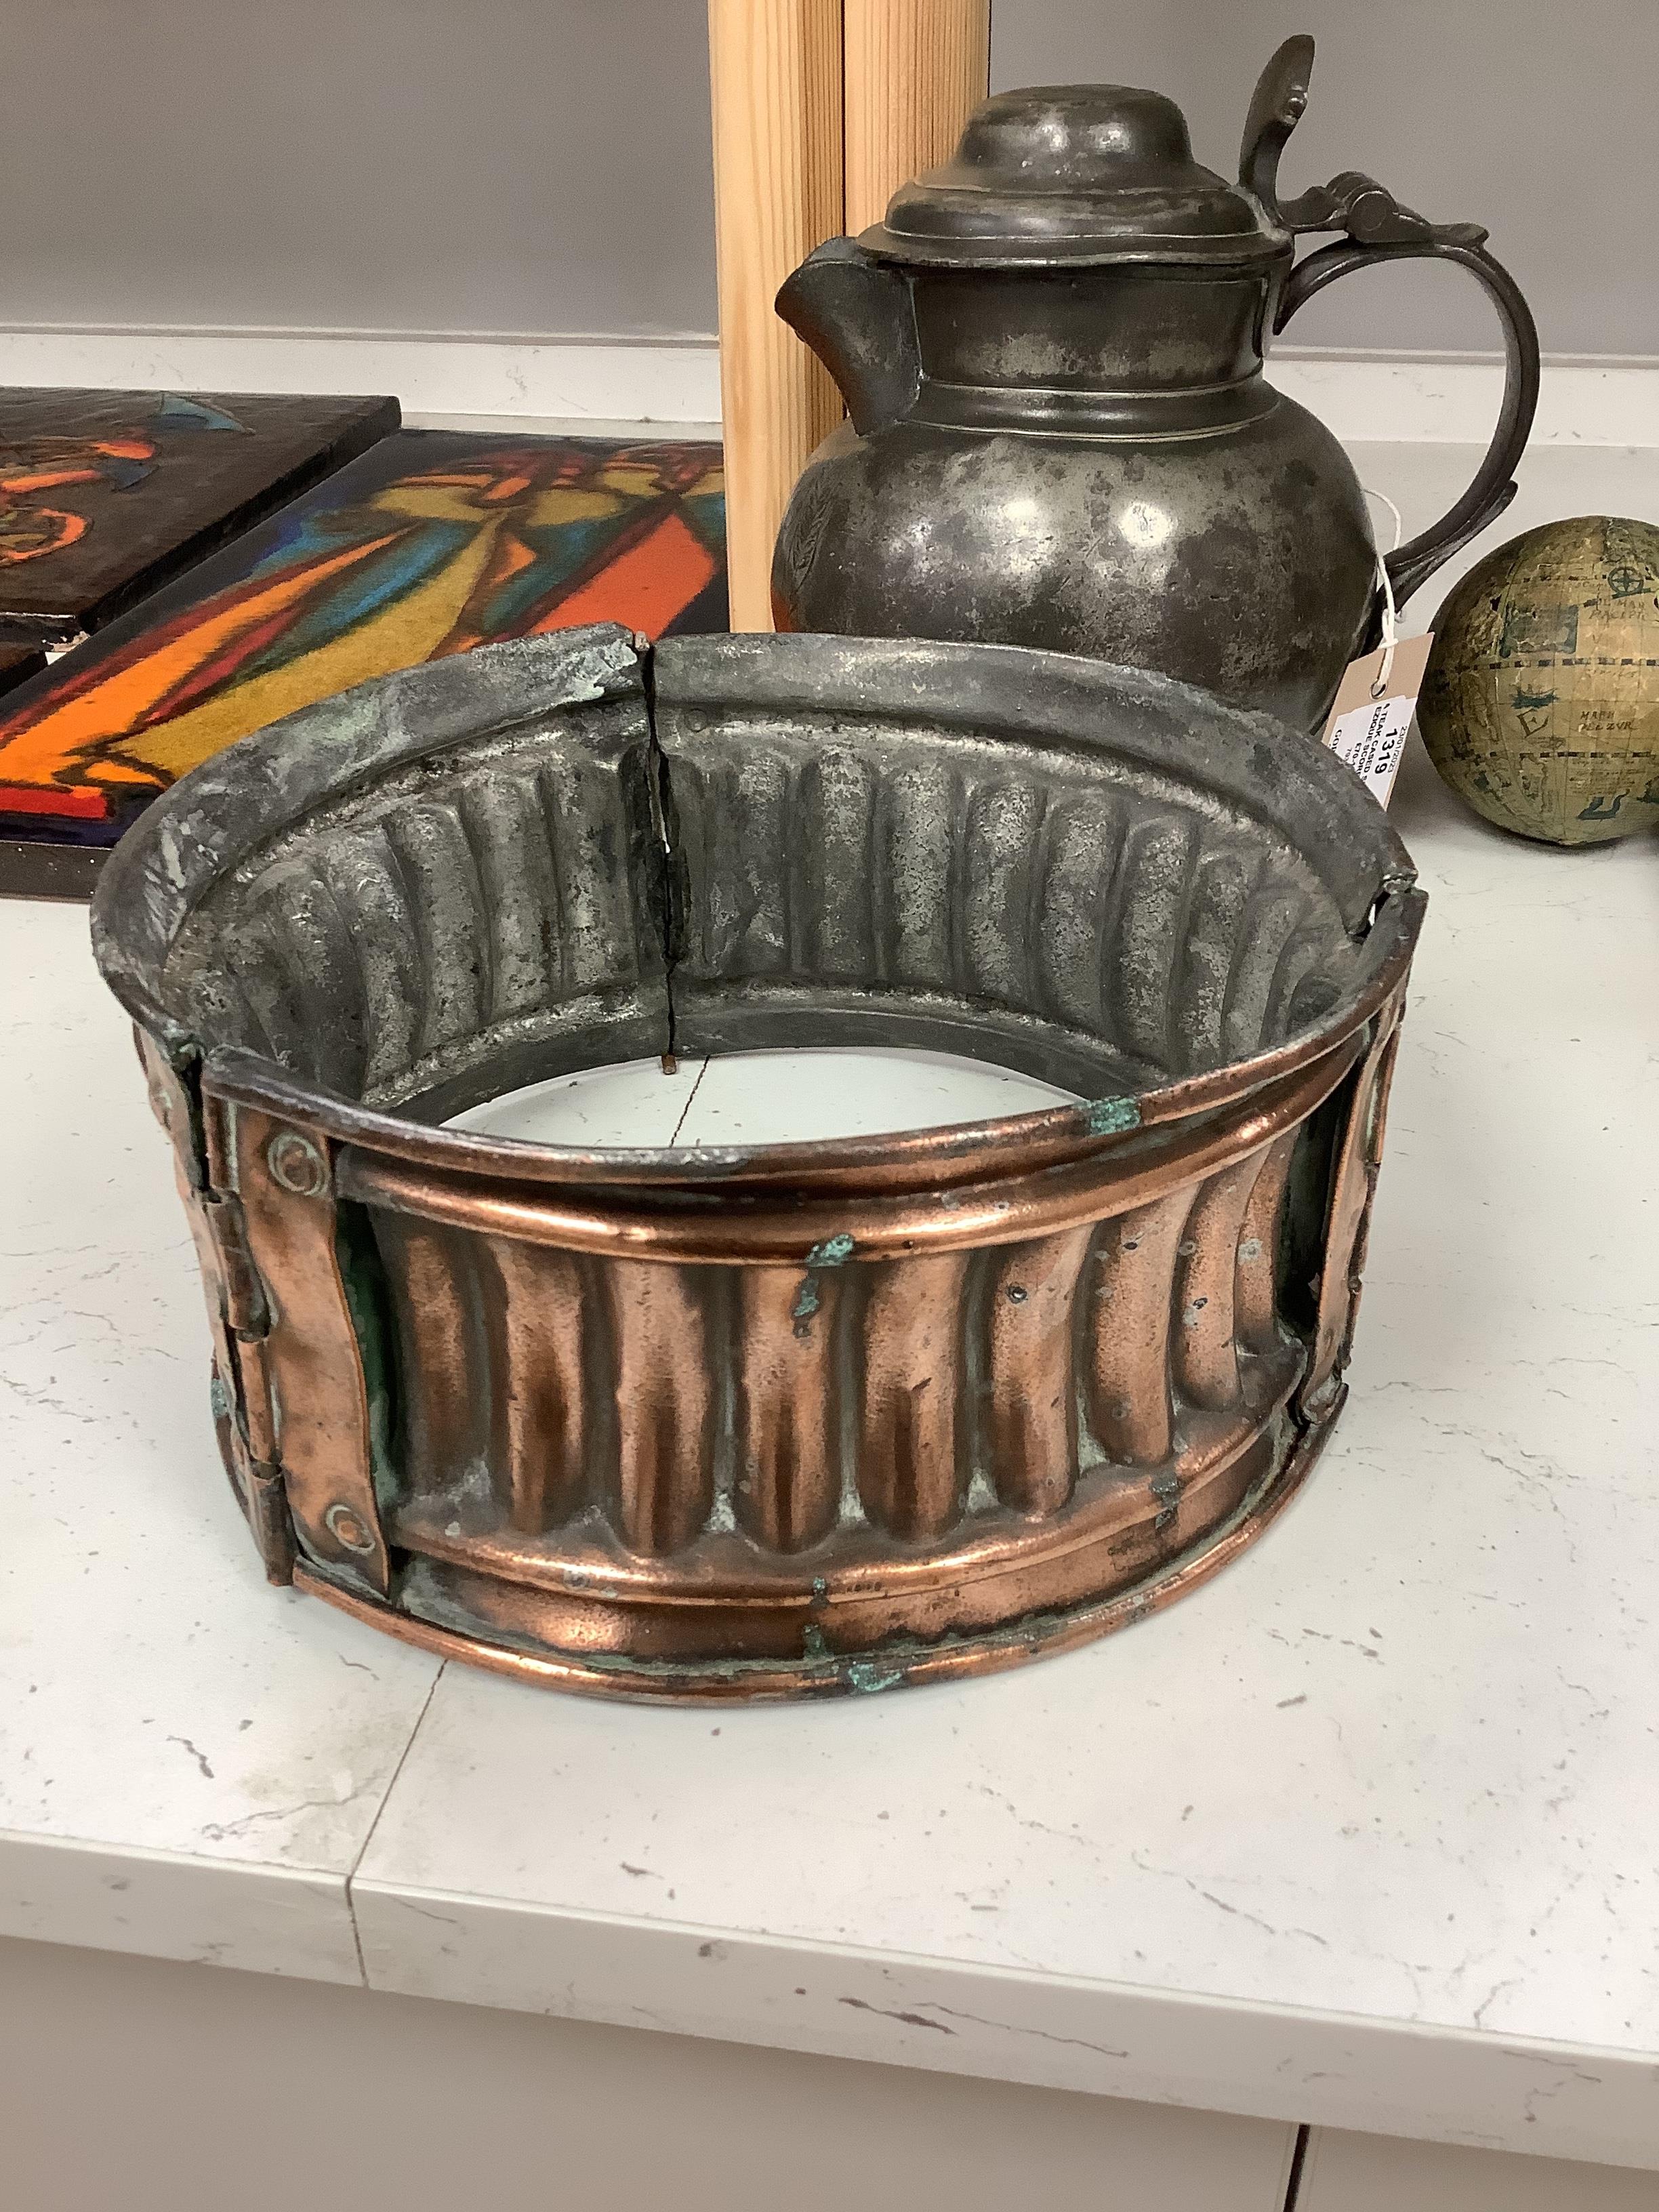 An unusual Victorian copper pie-mould, teak cased set of Bezique scorers, a brass link chain, a 19th century pewter pitcher, an Art Nouveau oil lamp, and two other items